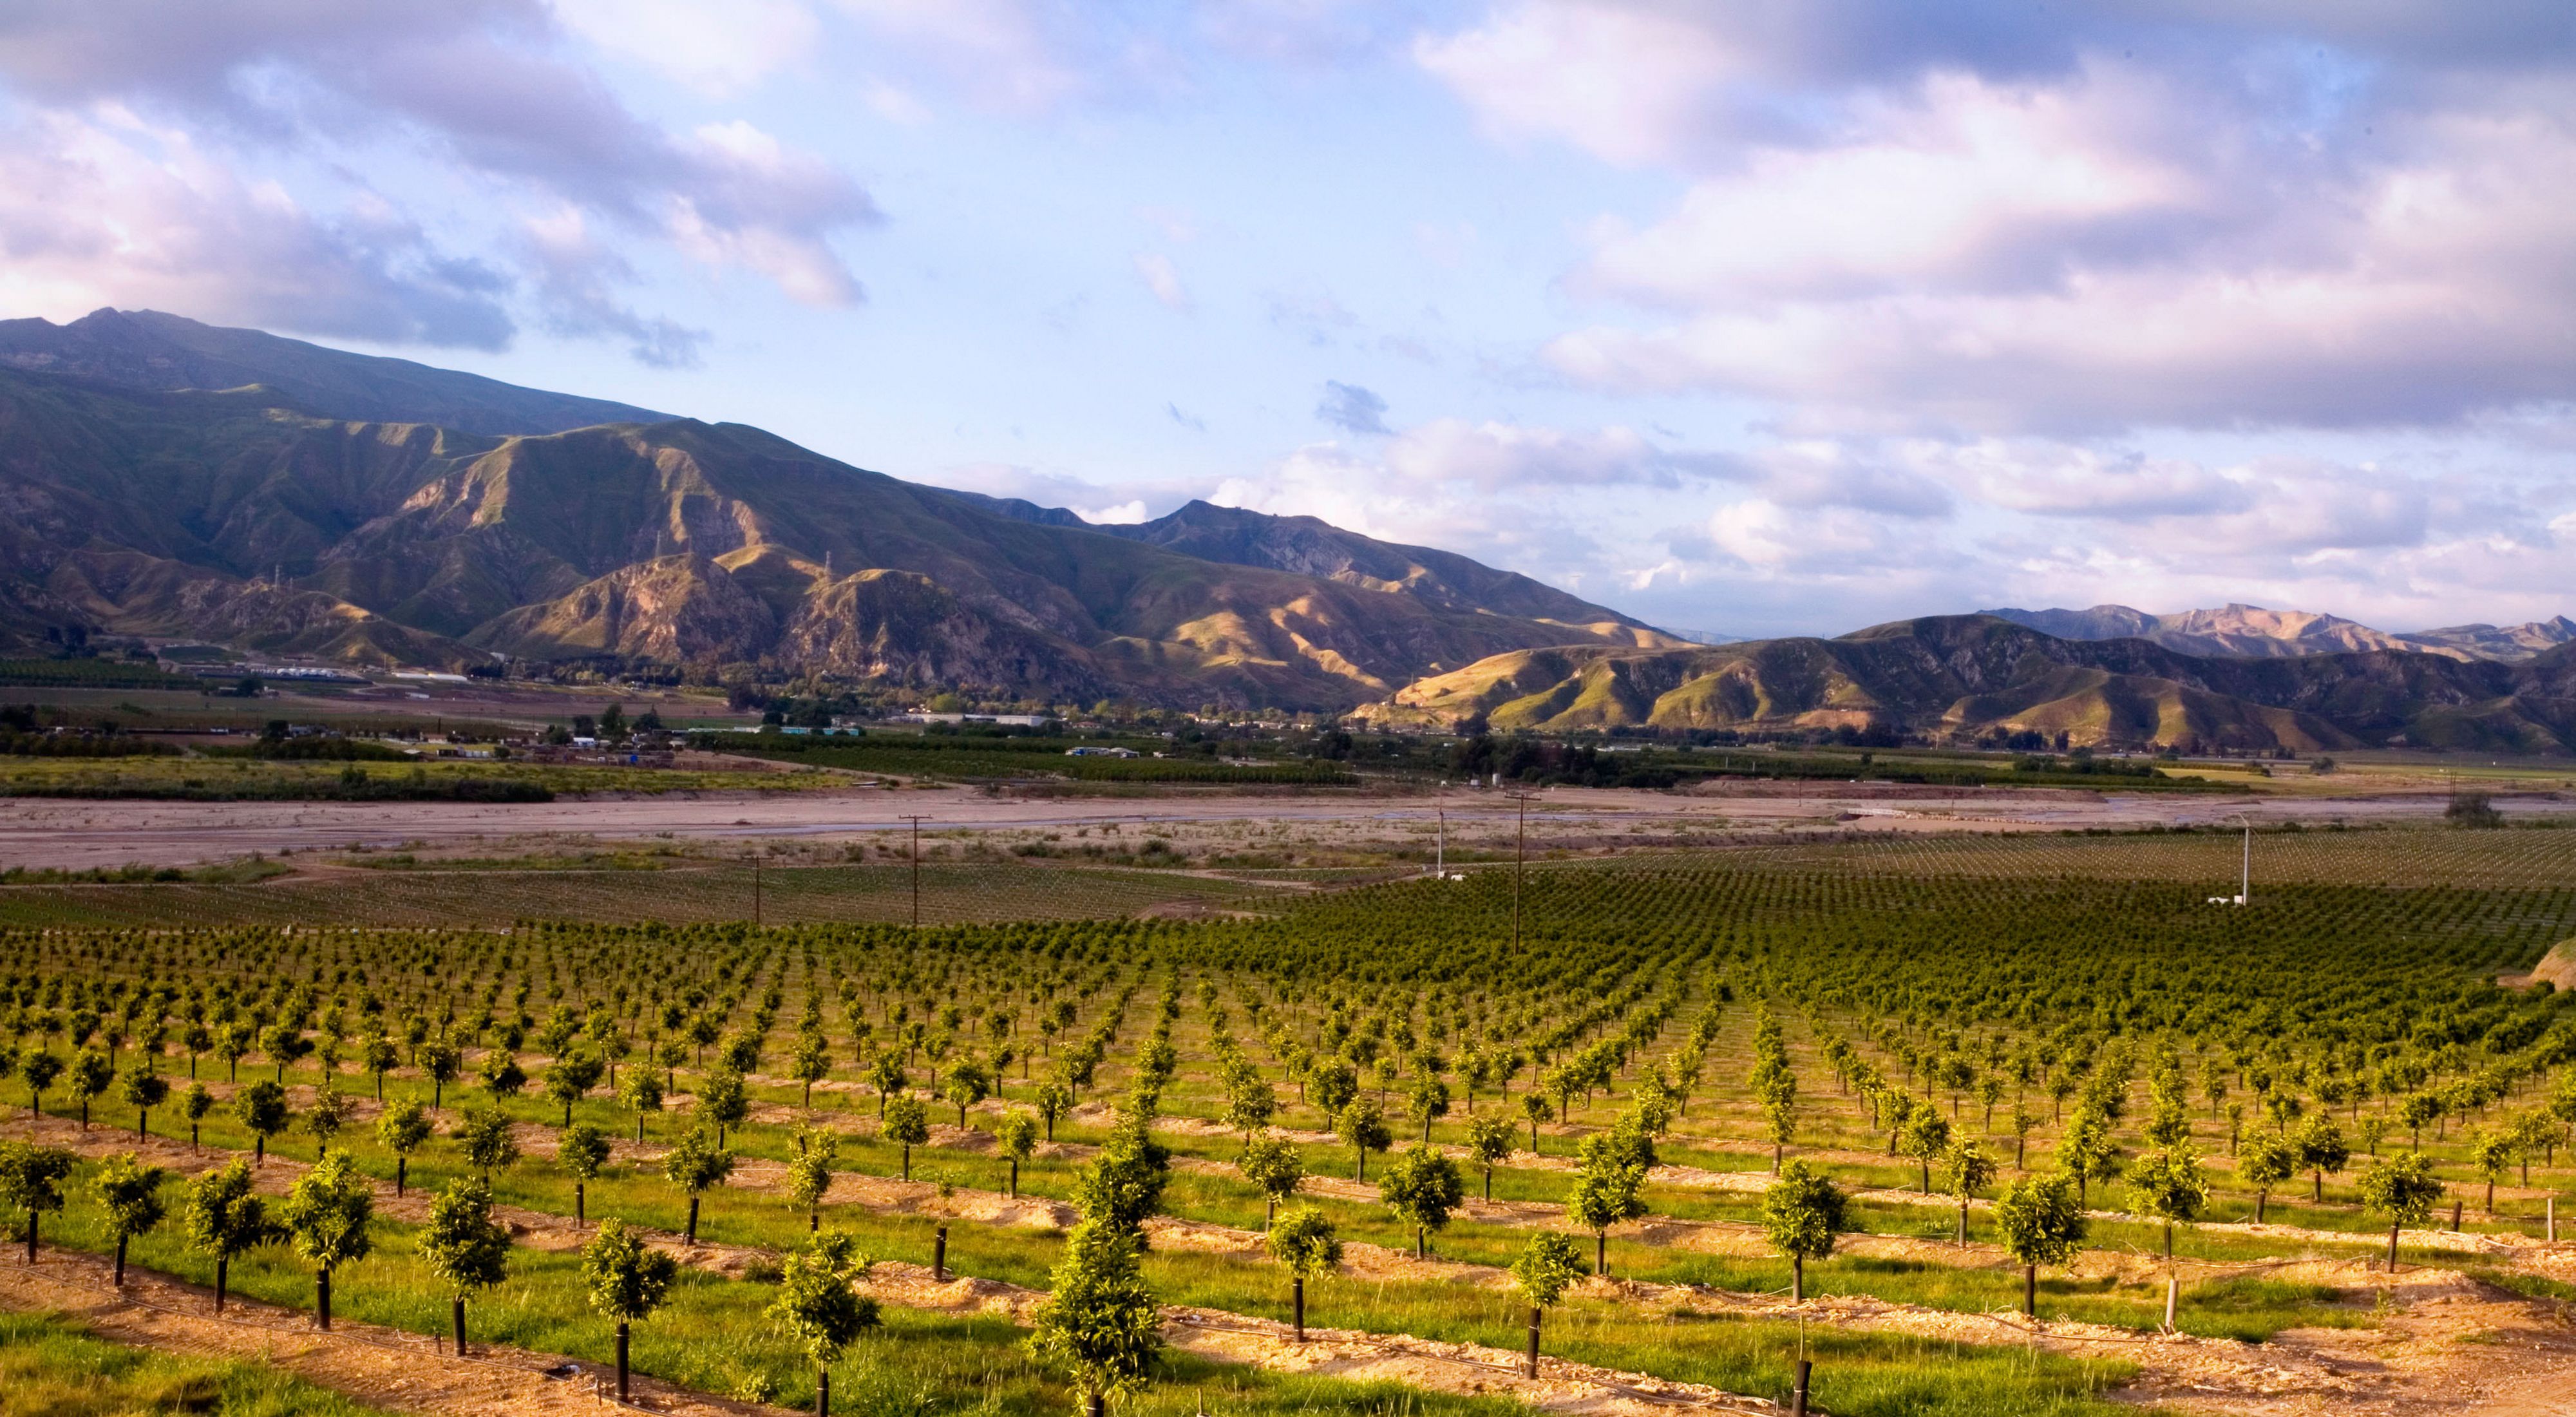 Orchards with rows of trees and mountains in the distance.